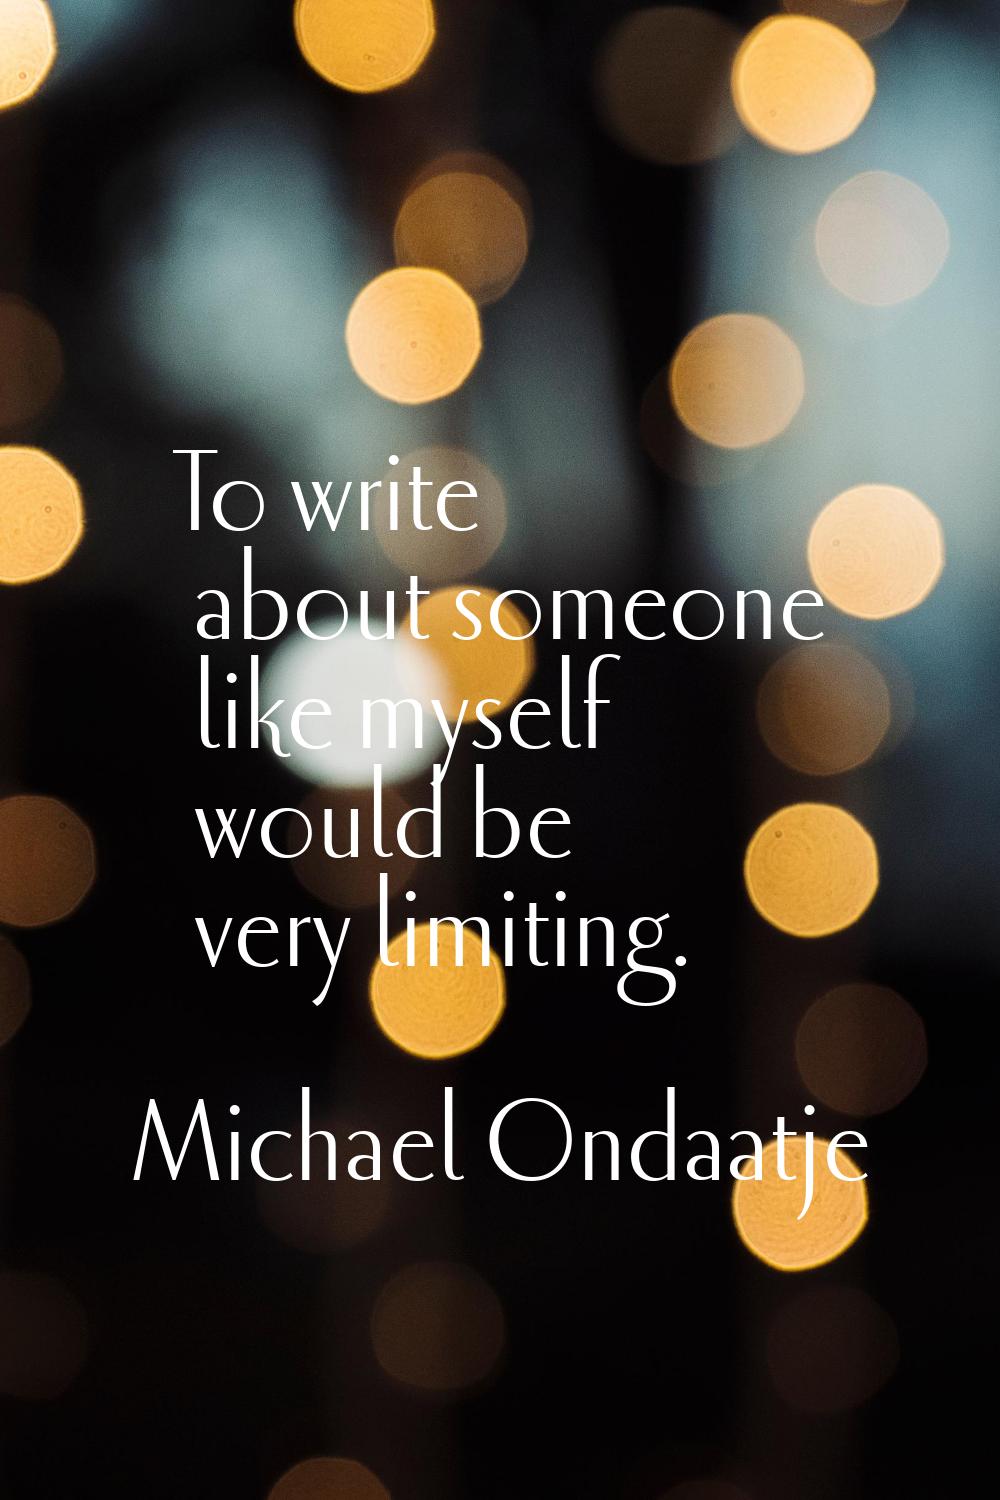 To write about someone like myself would be very limiting.